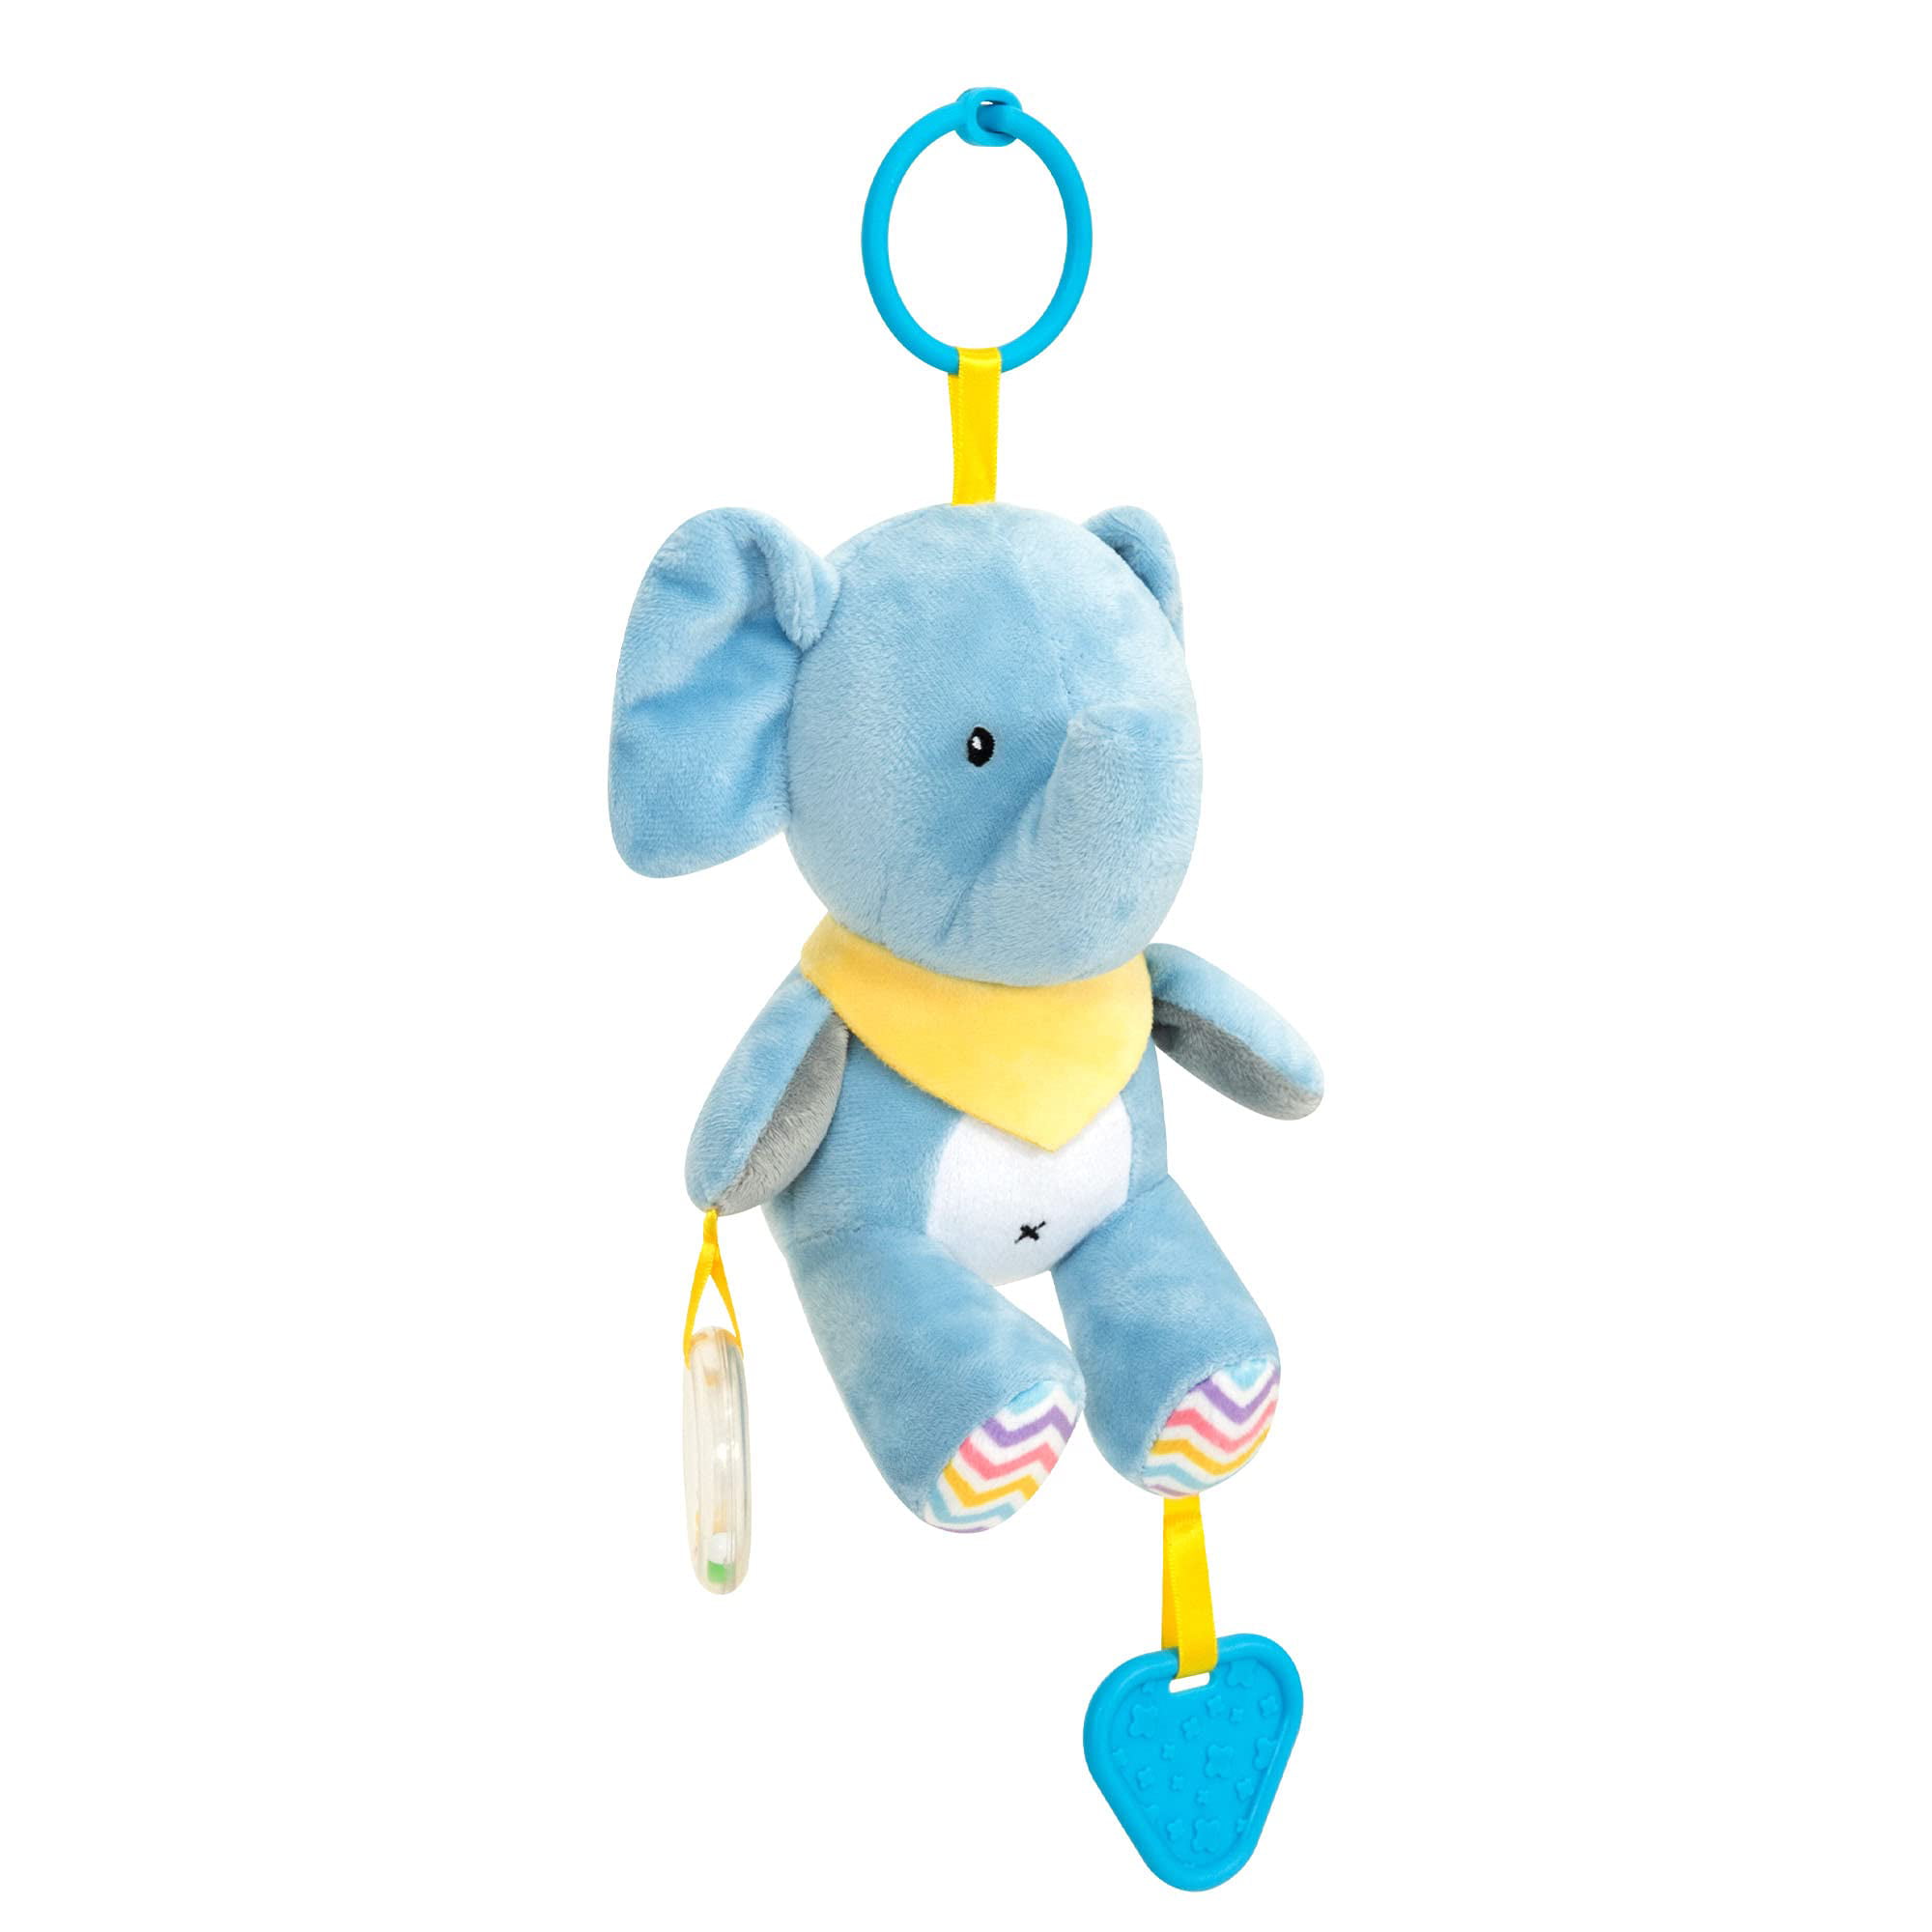 Elephant TILLYOU Baby Car Toys,Baby Car Toys & Stroller Toys,Car Seat Toys for Babies 0-6 Months,Plush Stuffed Blue Elephant Animals with Teethers,Clacking Ring for Infants Sensory Toys 